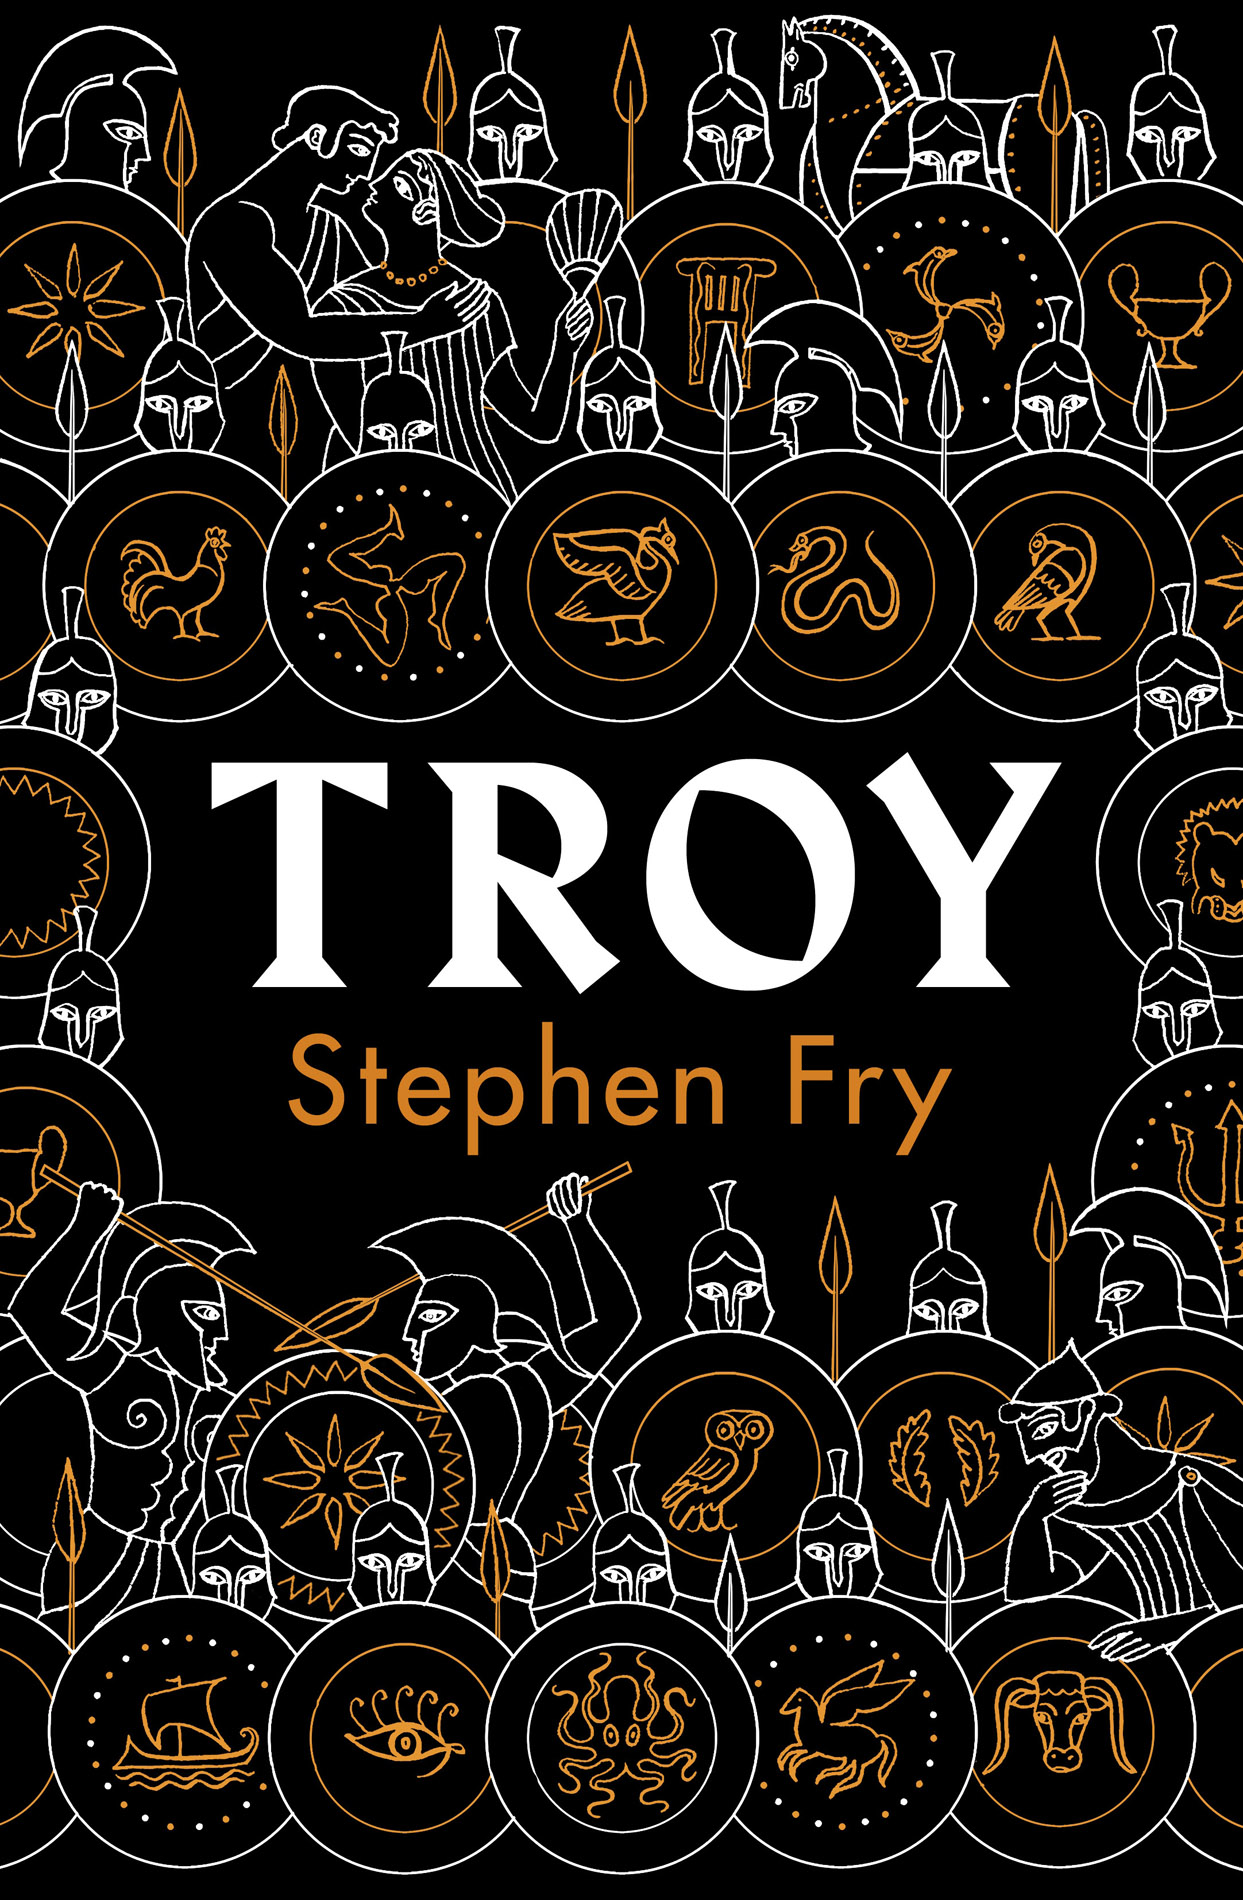 Stephen Fry: Troy (2020, Penguin Books, Limited)